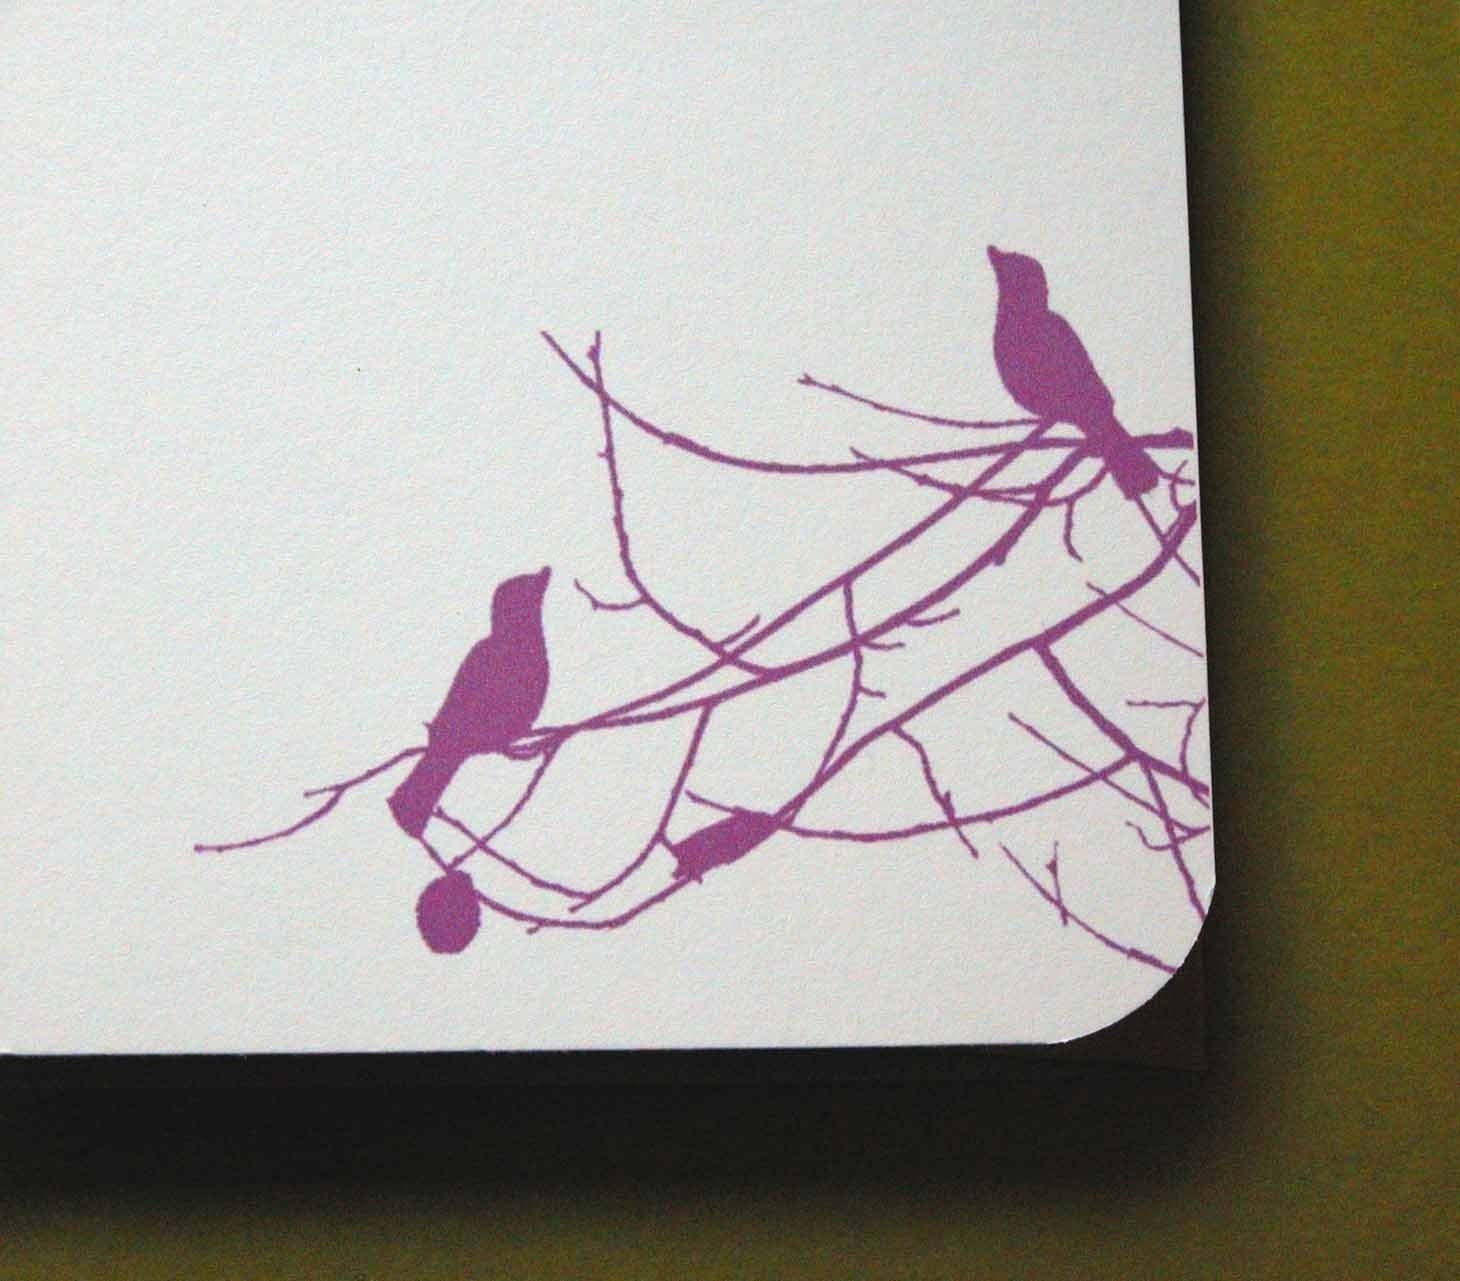 Set of 10 personalized flat notes- Birds on Branches Motif in Fuchsia with Navy Text